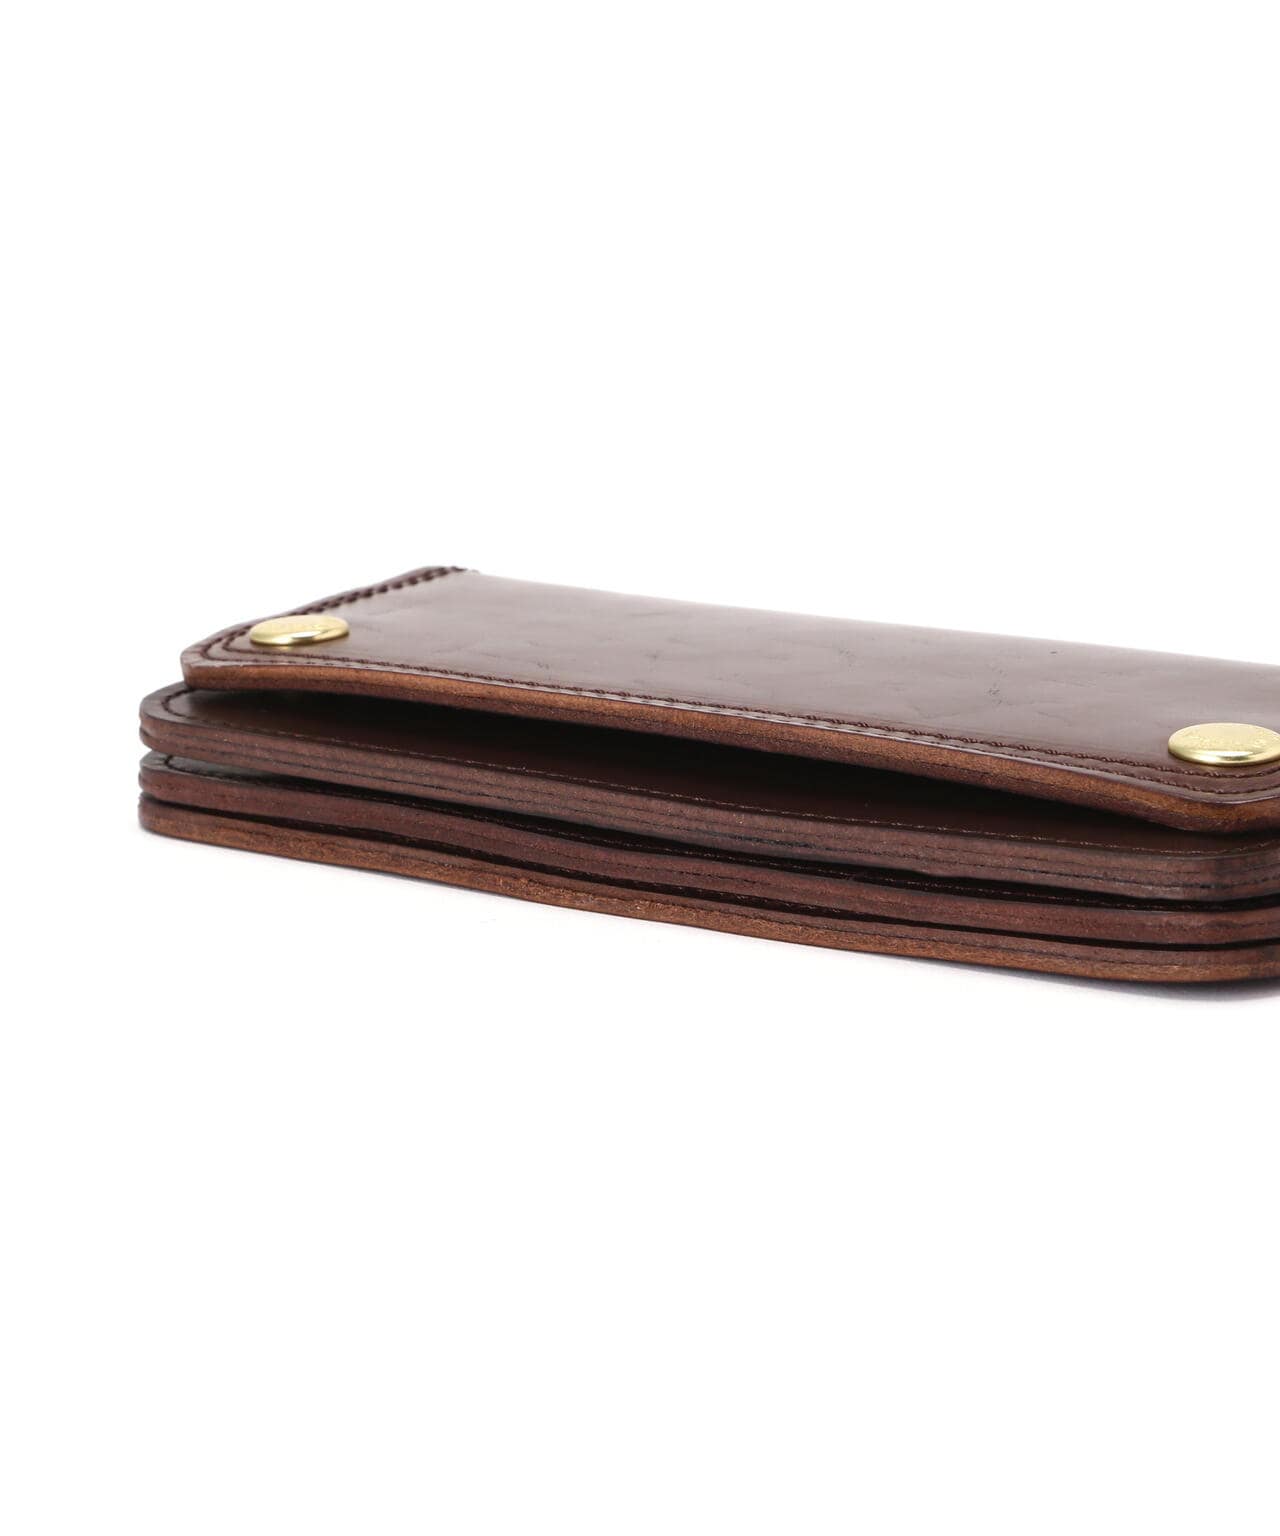 HORWEEN LEATHER FLAP LONG WALLET/ ホーウィン フラップ 長財布